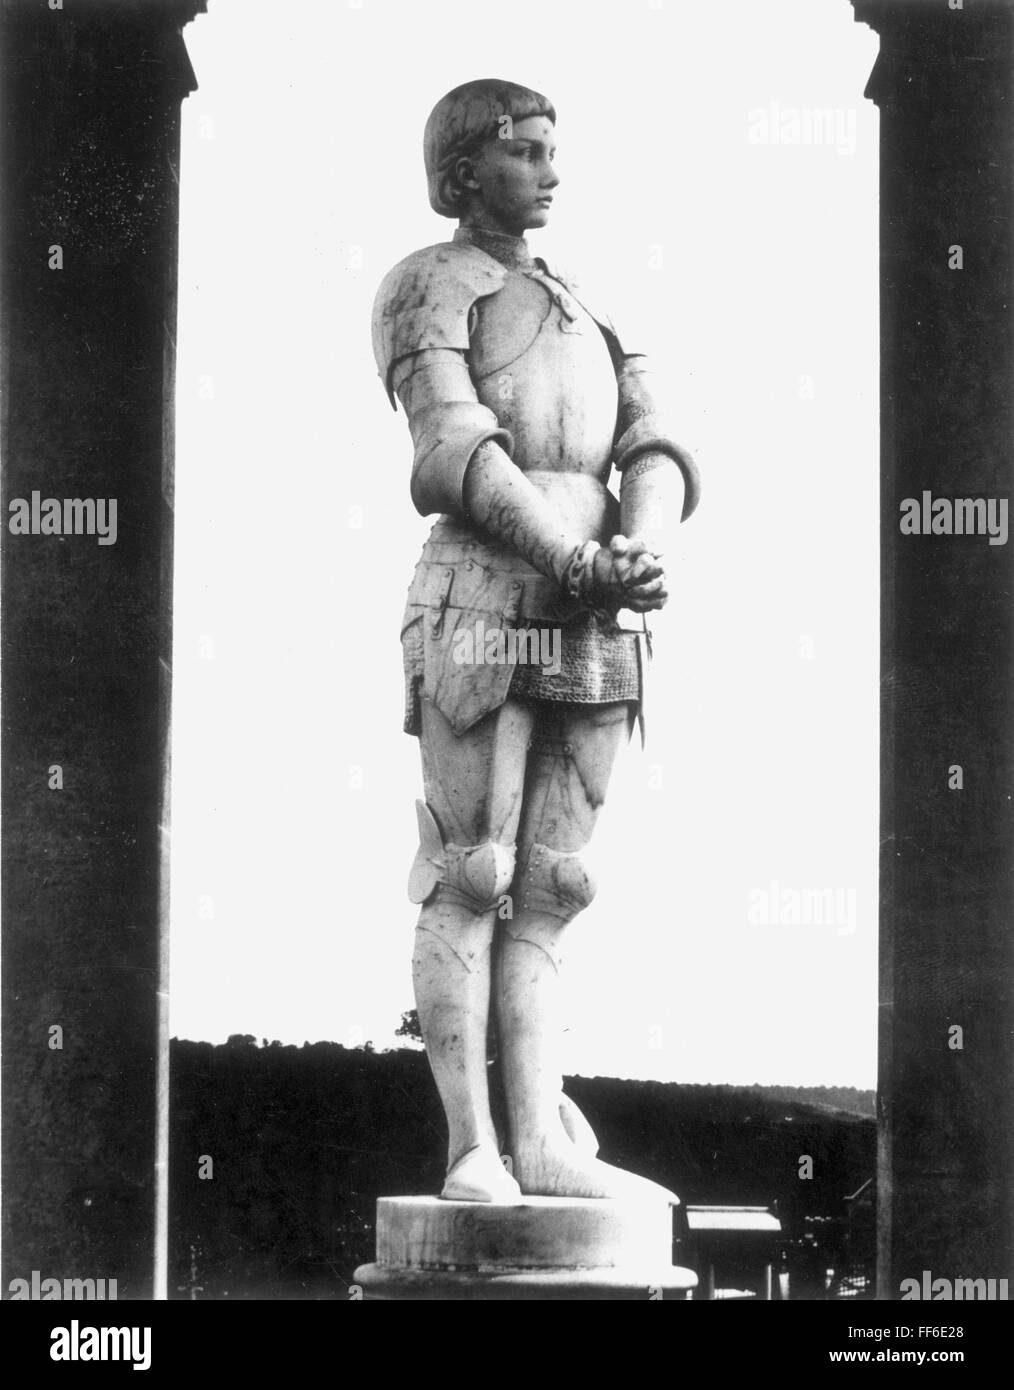 JOAN OF ARC (1412-1431). /nFrench national heroine. As a prisoner: sculpture by Louis Ernest Barrias (1841-1905) at Bonsecours, France. Stock Photo